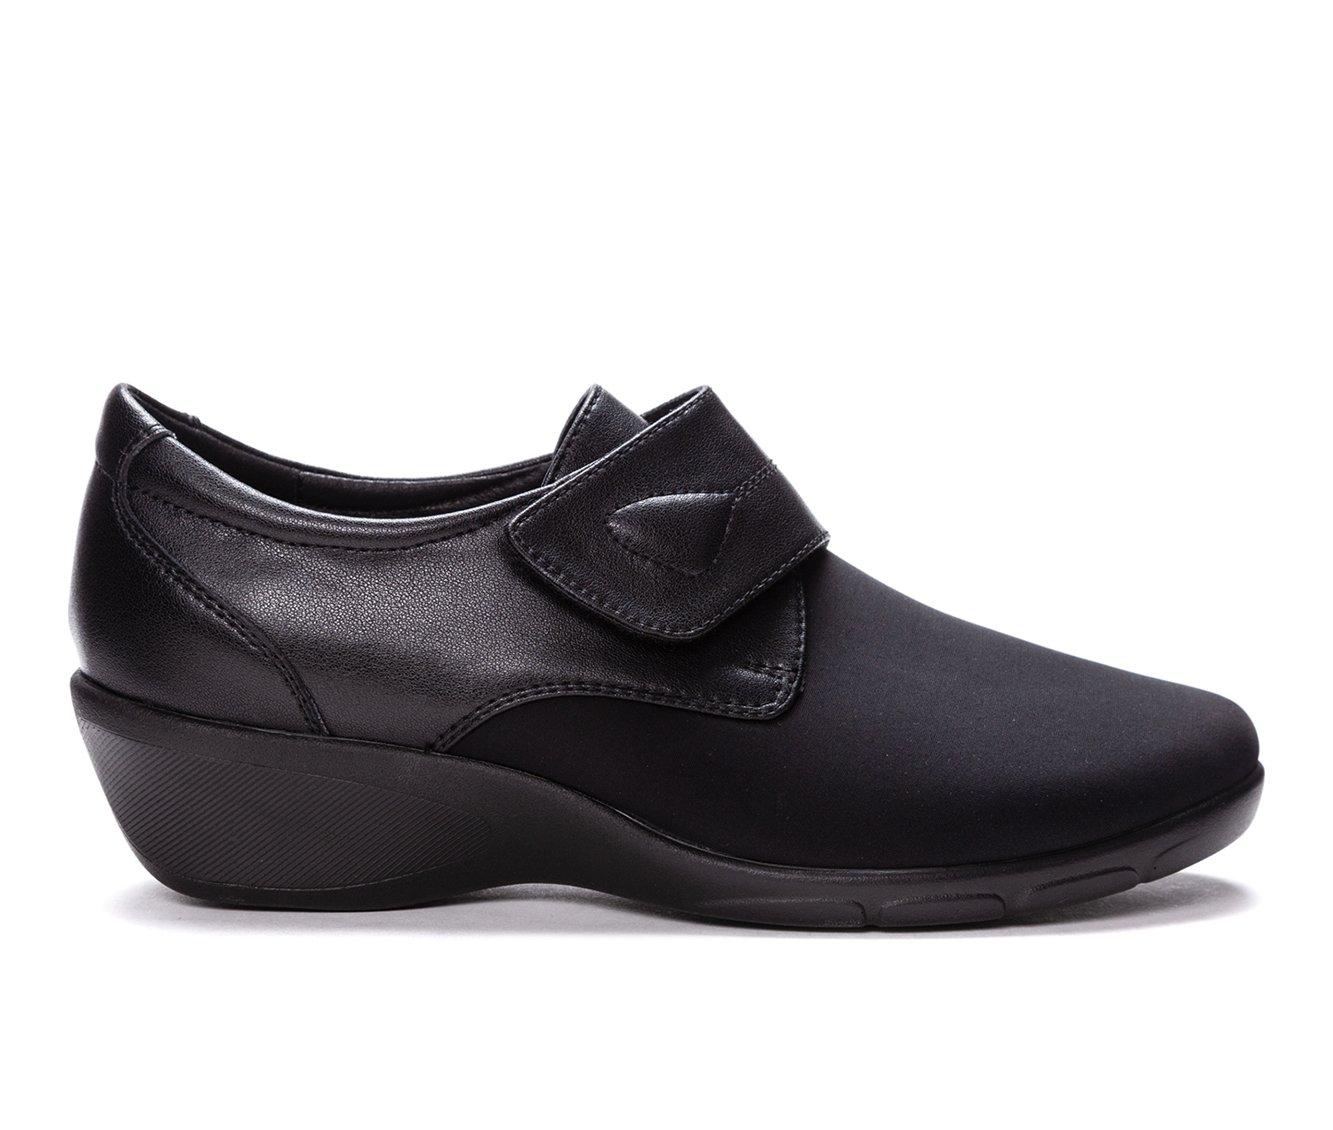 Women's Propet Wilma Sustainable Shoes